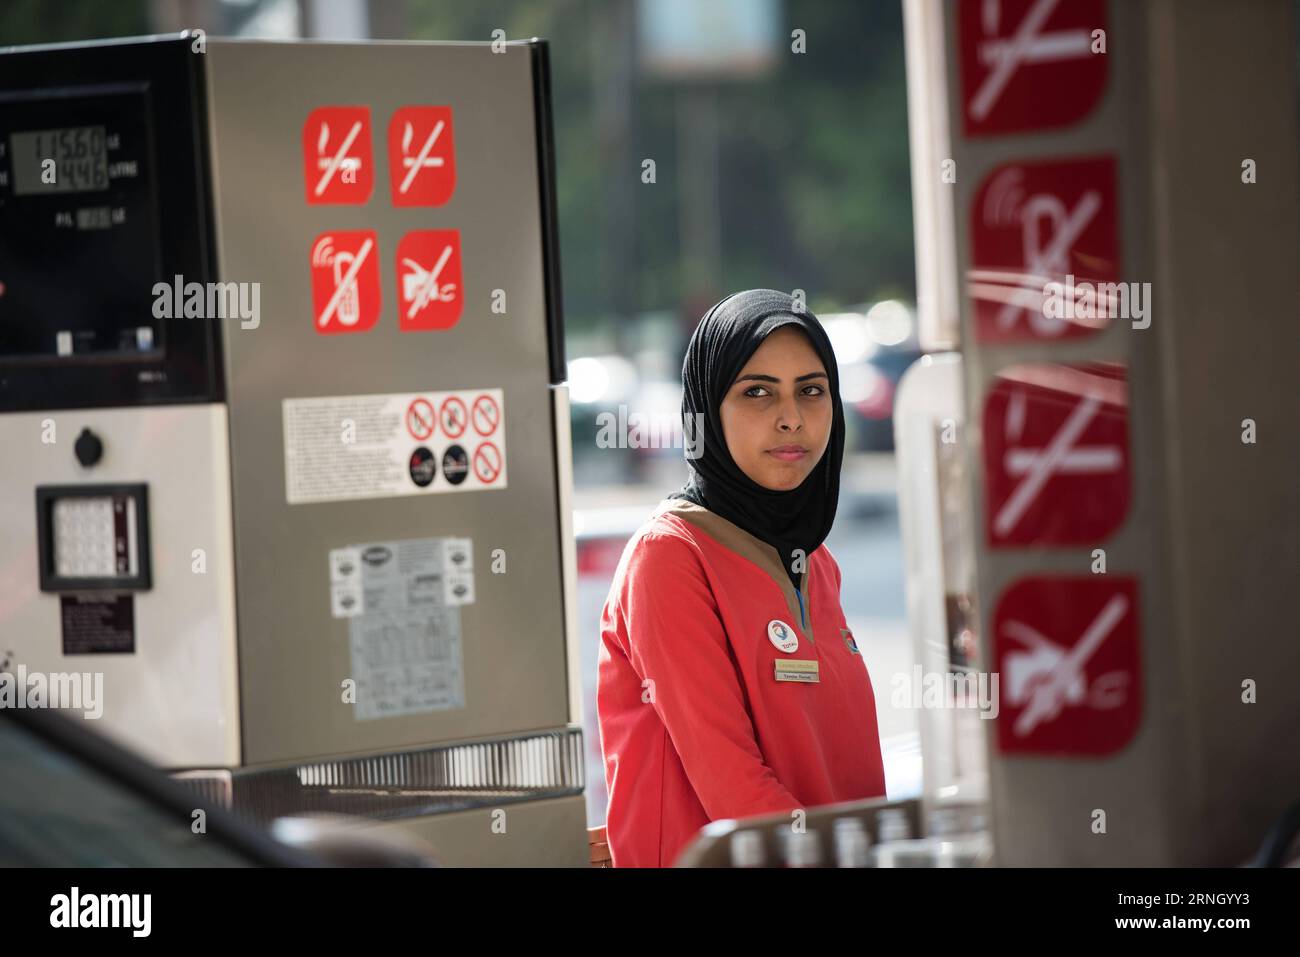 Ägypten - Weibliche Arbeitskräfte an einer Tankstelle in Kairo (161018) -- CAIRO, Oct. 18, 2016 -- A female employee serves a vehicle at a gas station in Maadi district of Cairo, Egypt, Oct. 17, 2016. Dressed in red buttonless shirt and black pants uniform, 24-year-old veiled Hadeer Ashraf looked confident and swift while holding the fuel pump nozzle gun to serve the vehicles lined up at Total gas station near the Nile Corniche Street in Maadi district southwestern the Egyptian capital city of Cairo. ) (yk) EGYPT-CAIRO-GAS STATION-FEMALE WORKERS MengxTao PUBLICATIONxNOTxINxCHN   Egypt Female W Stock Photo